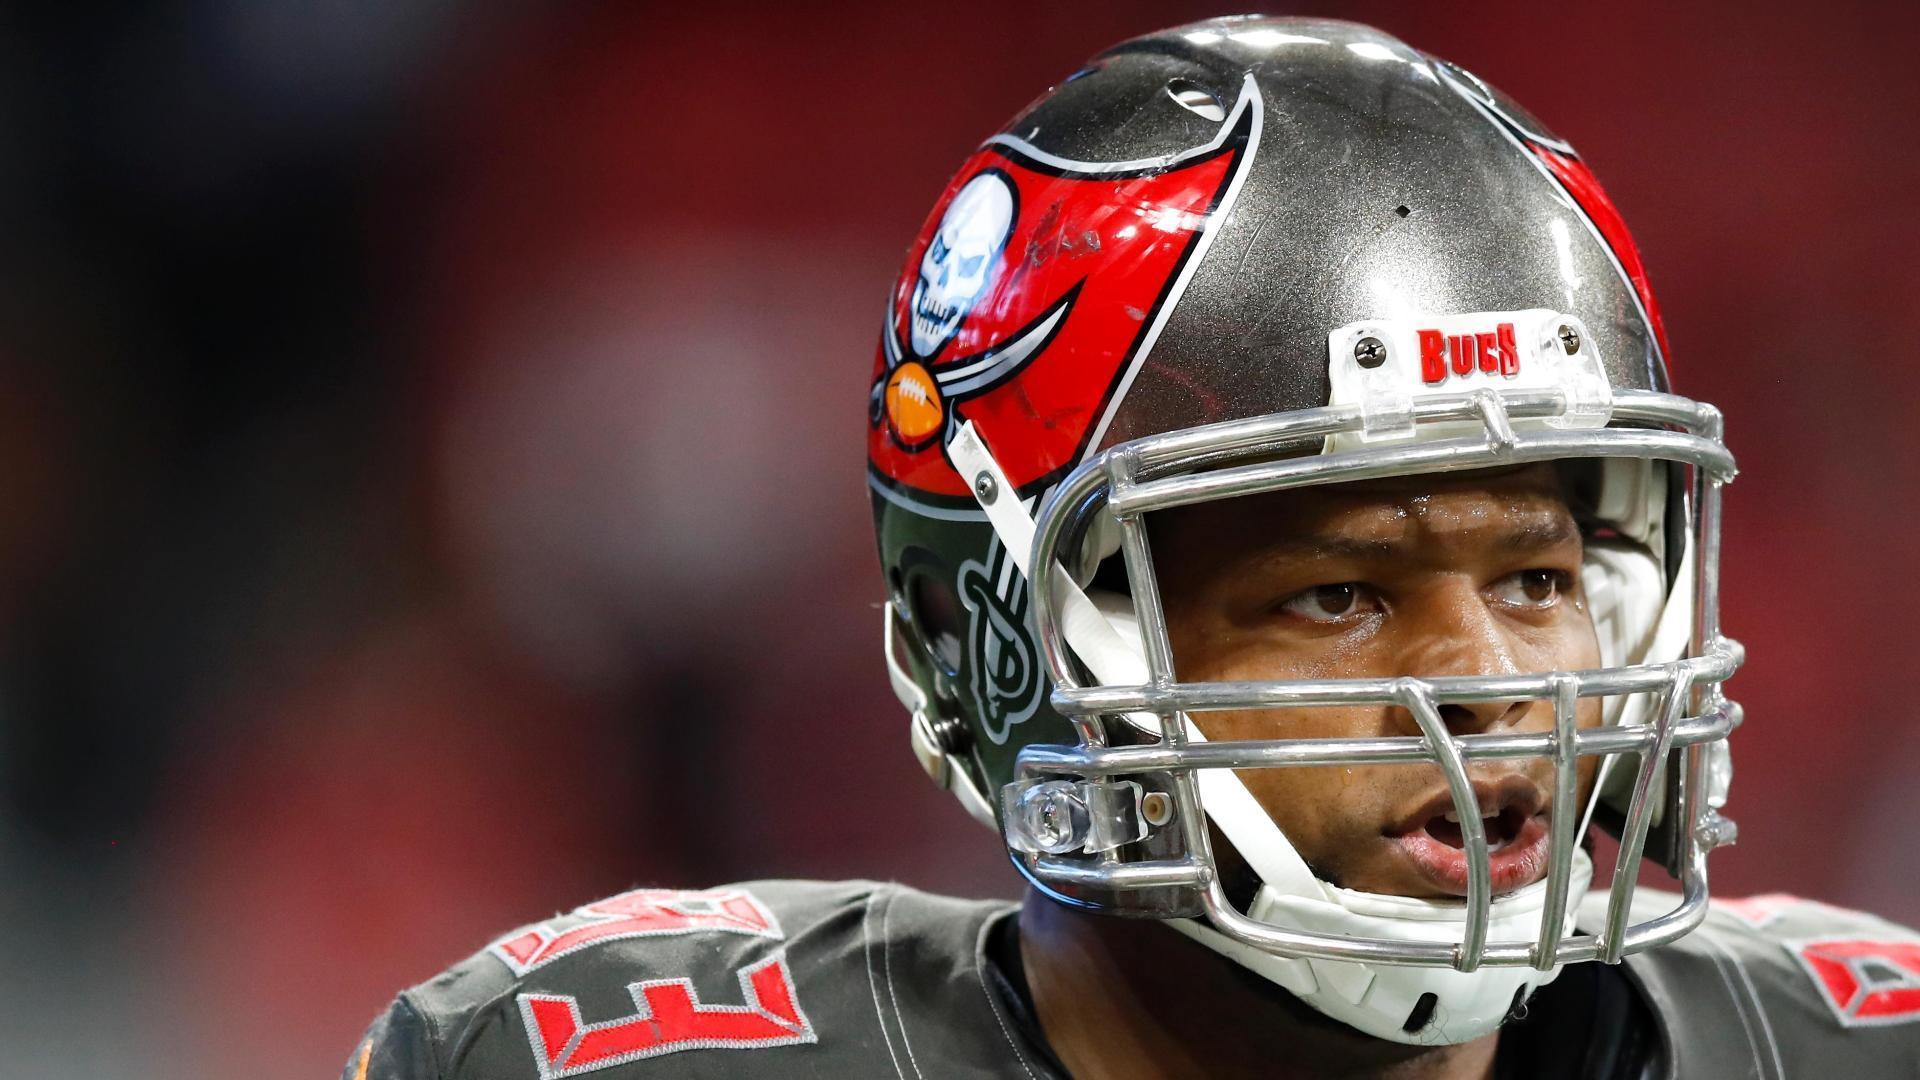 Suh returning to Bucs on one-year deal